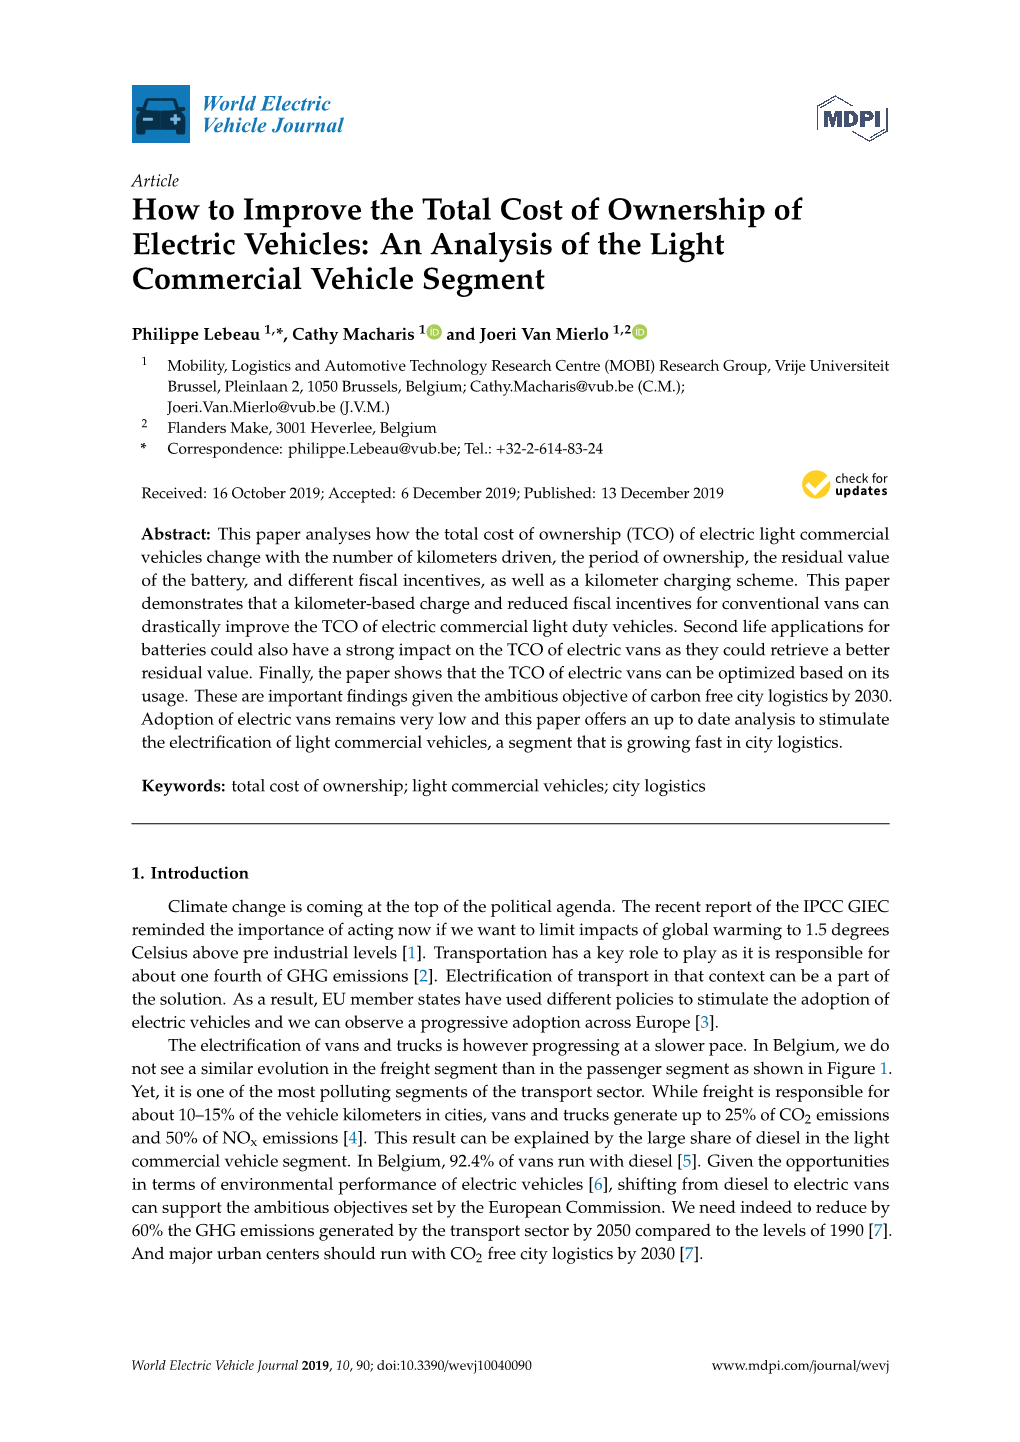 How to Improve the Total Cost of Ownership of Electric Vehicles: an Analysis of the Light Commercial Vehicle Segment